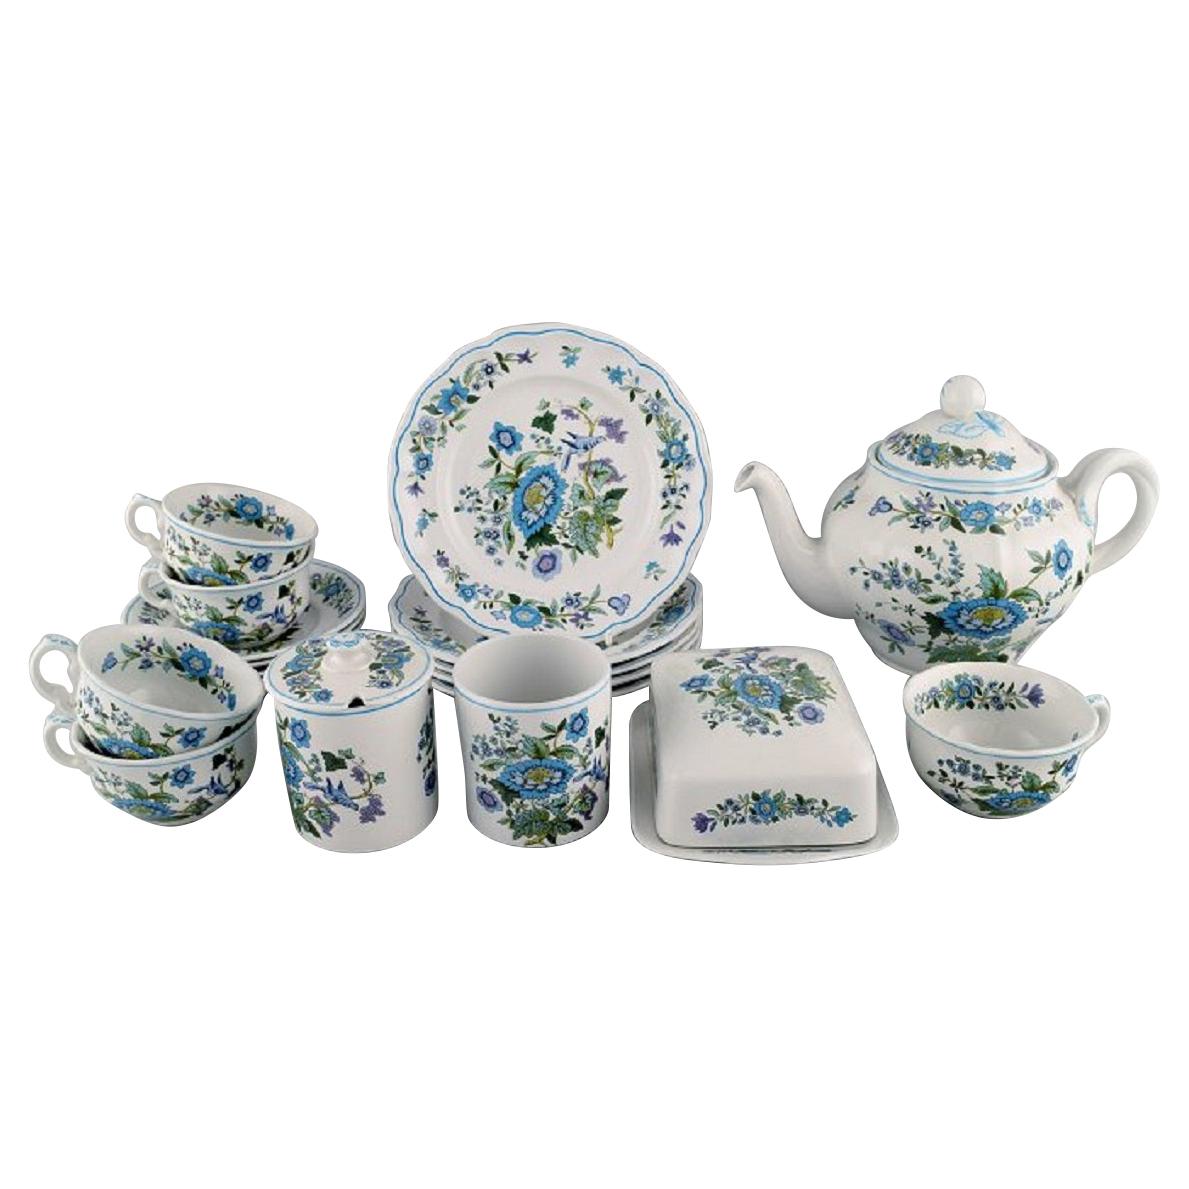 Spode, England, Mulberry Tea Service for Five People in Hand-Painted Porcelain